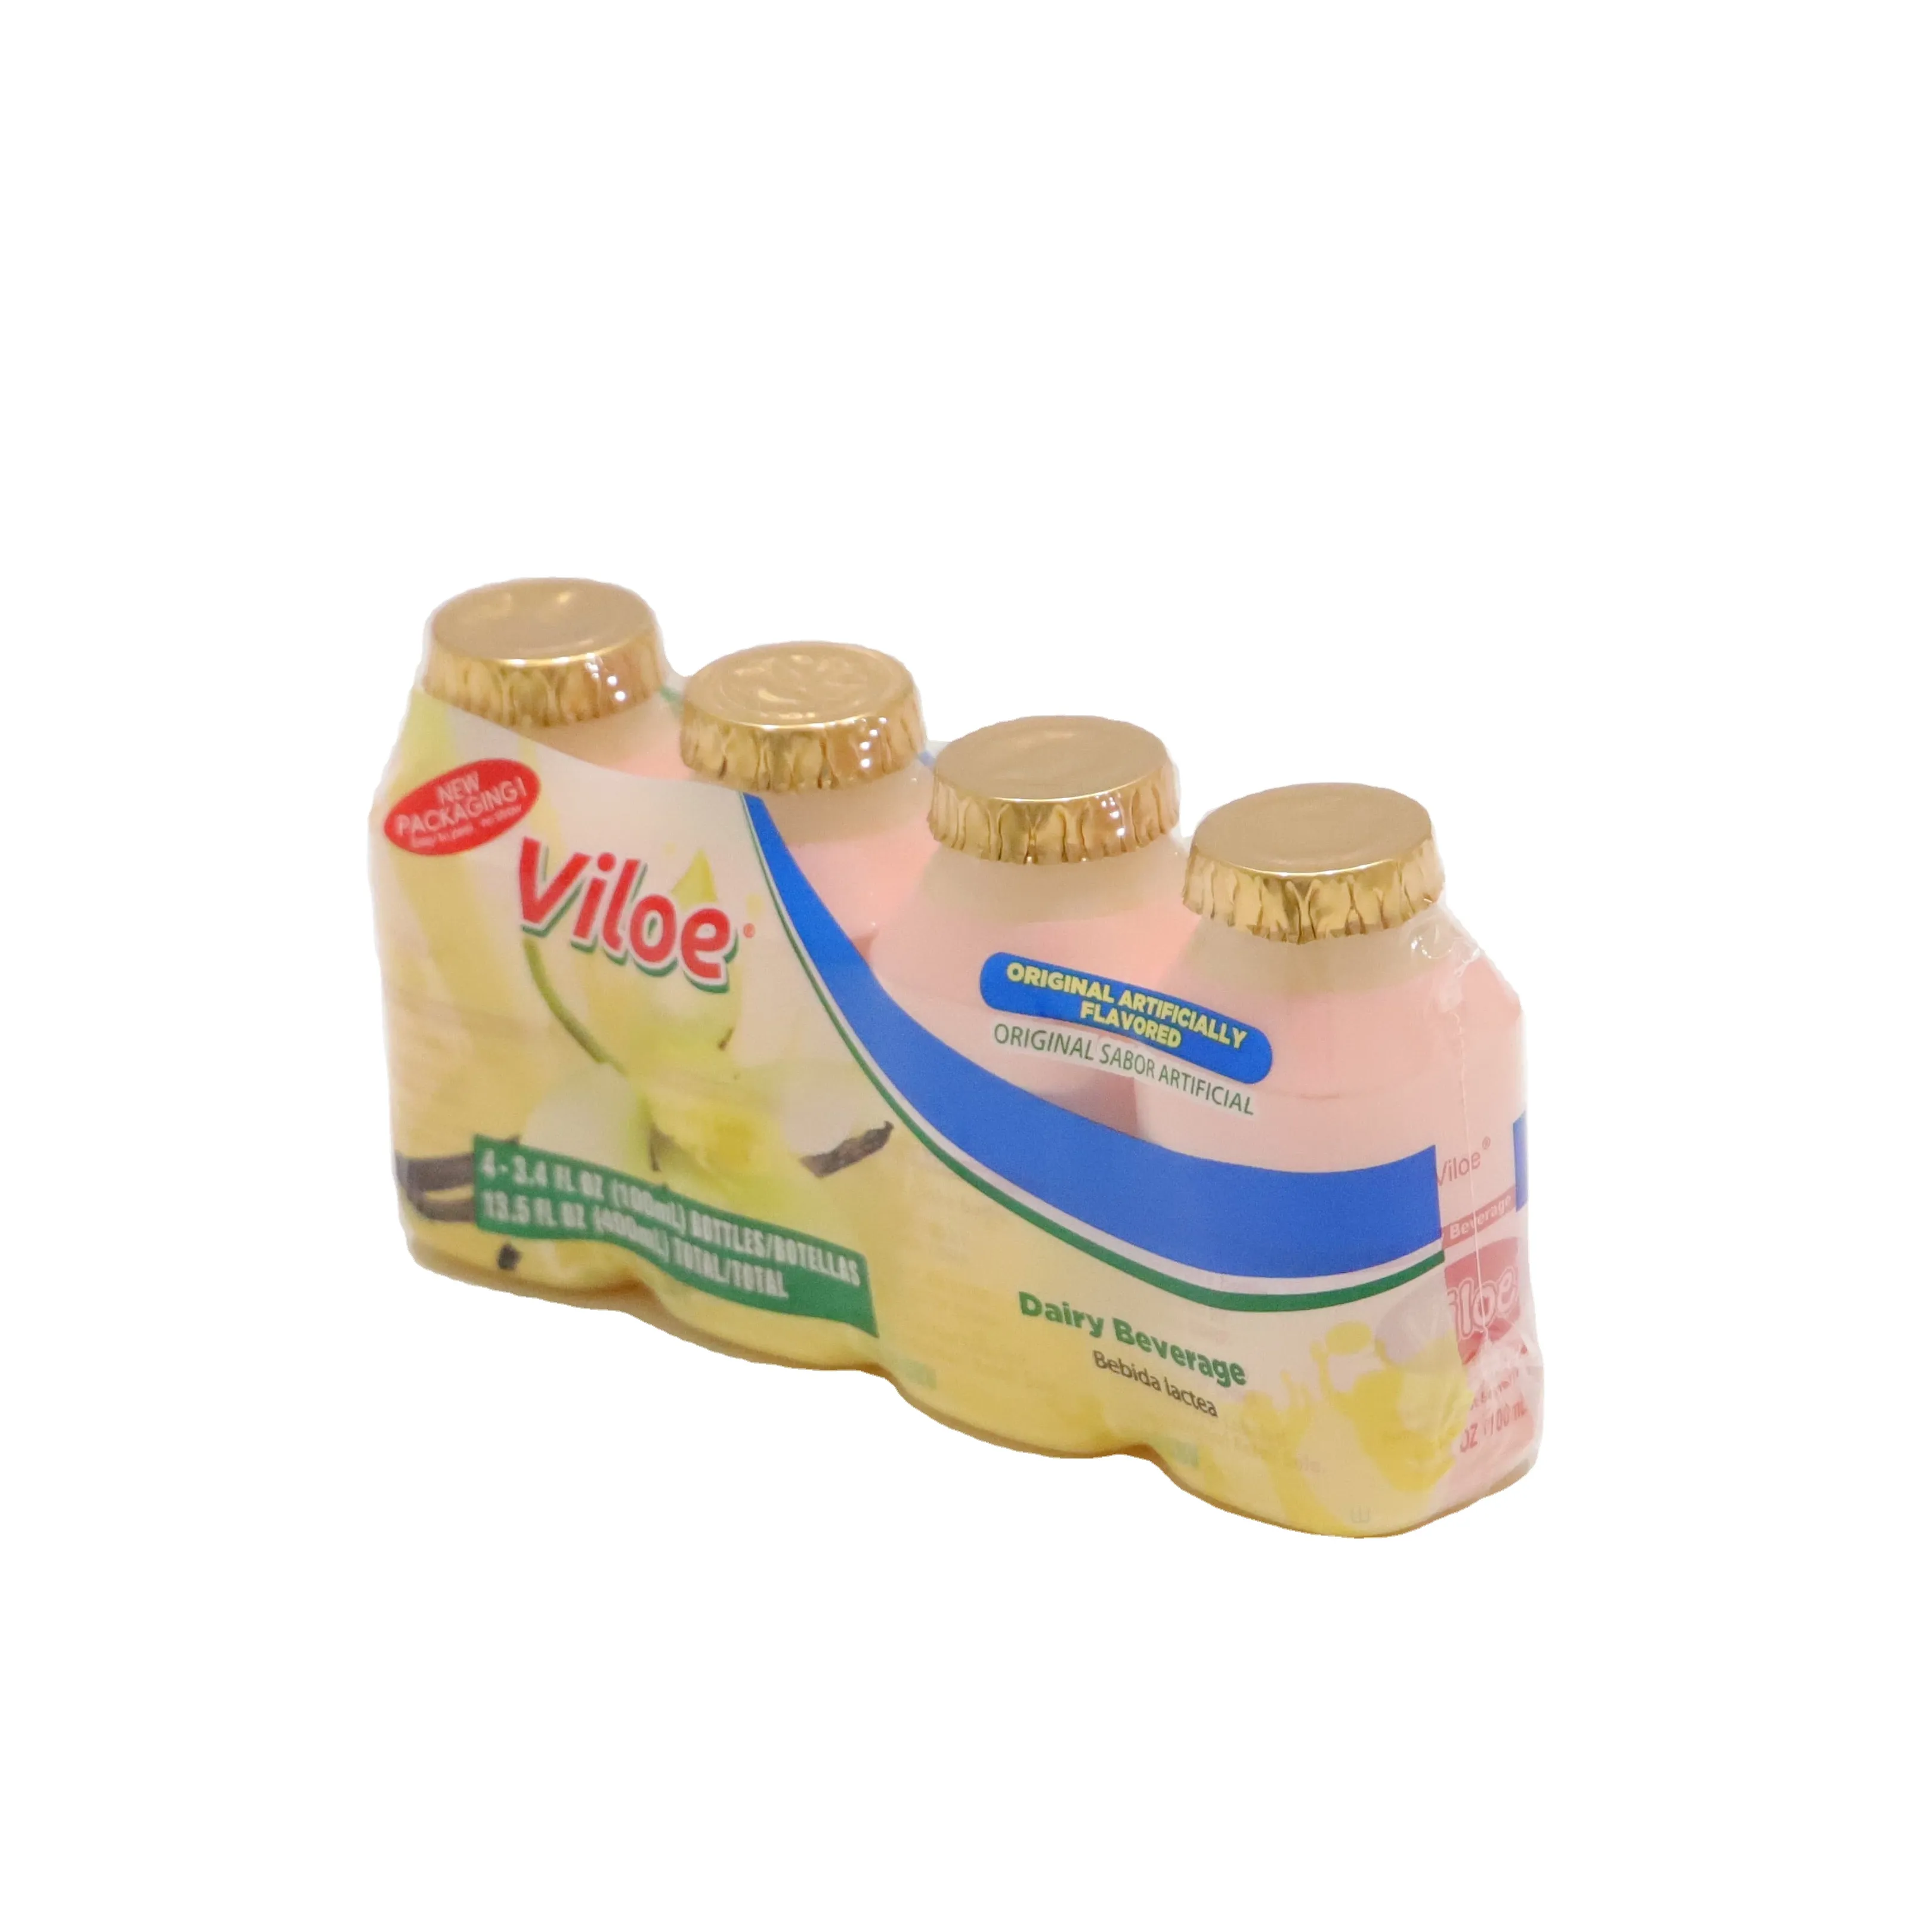 Viloe Soft Drinks about Original Flavored Saturated Fat Free and Trans Fat Free